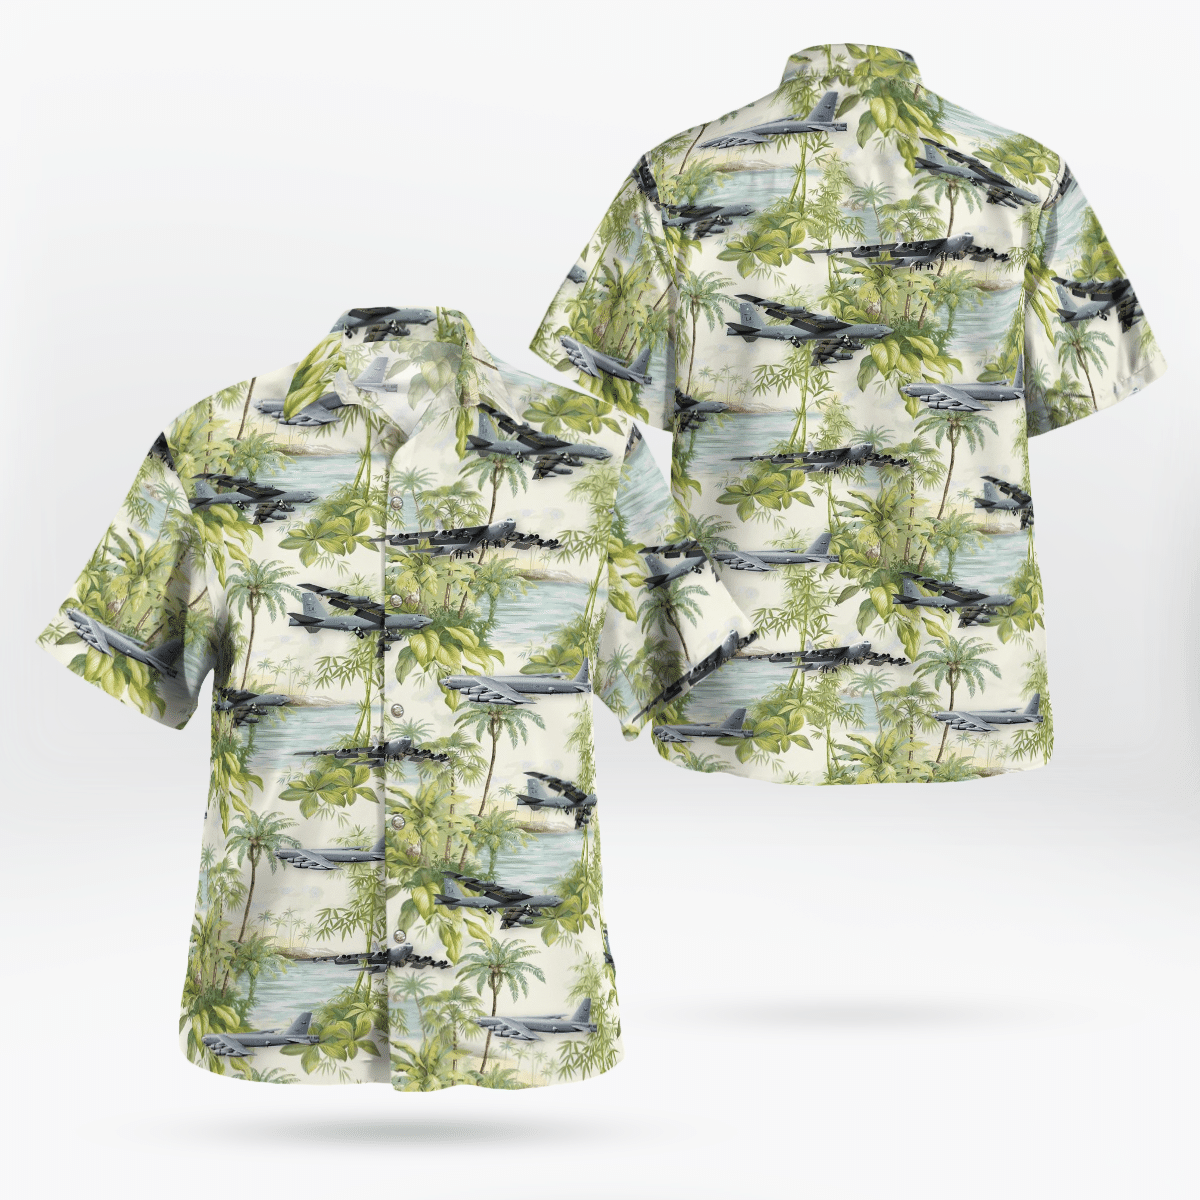 Consider getting these Hawaiian Shirt for your friends 401